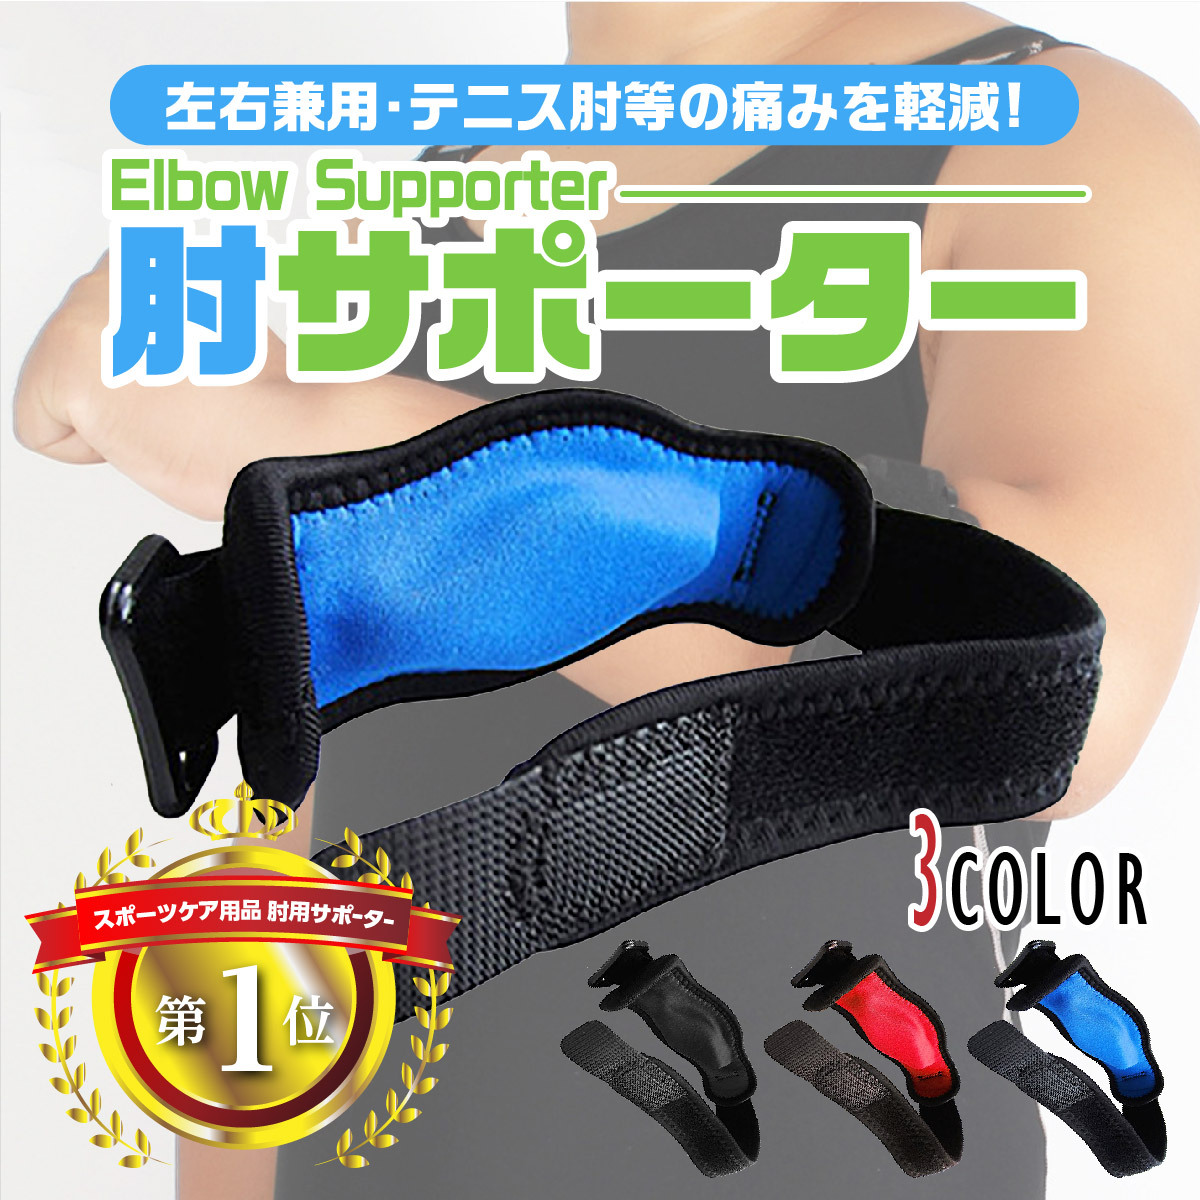  elbow supporter tennis elbow .tore Golf bare- elbow band belt left right combined use sport pain reduction training practice 